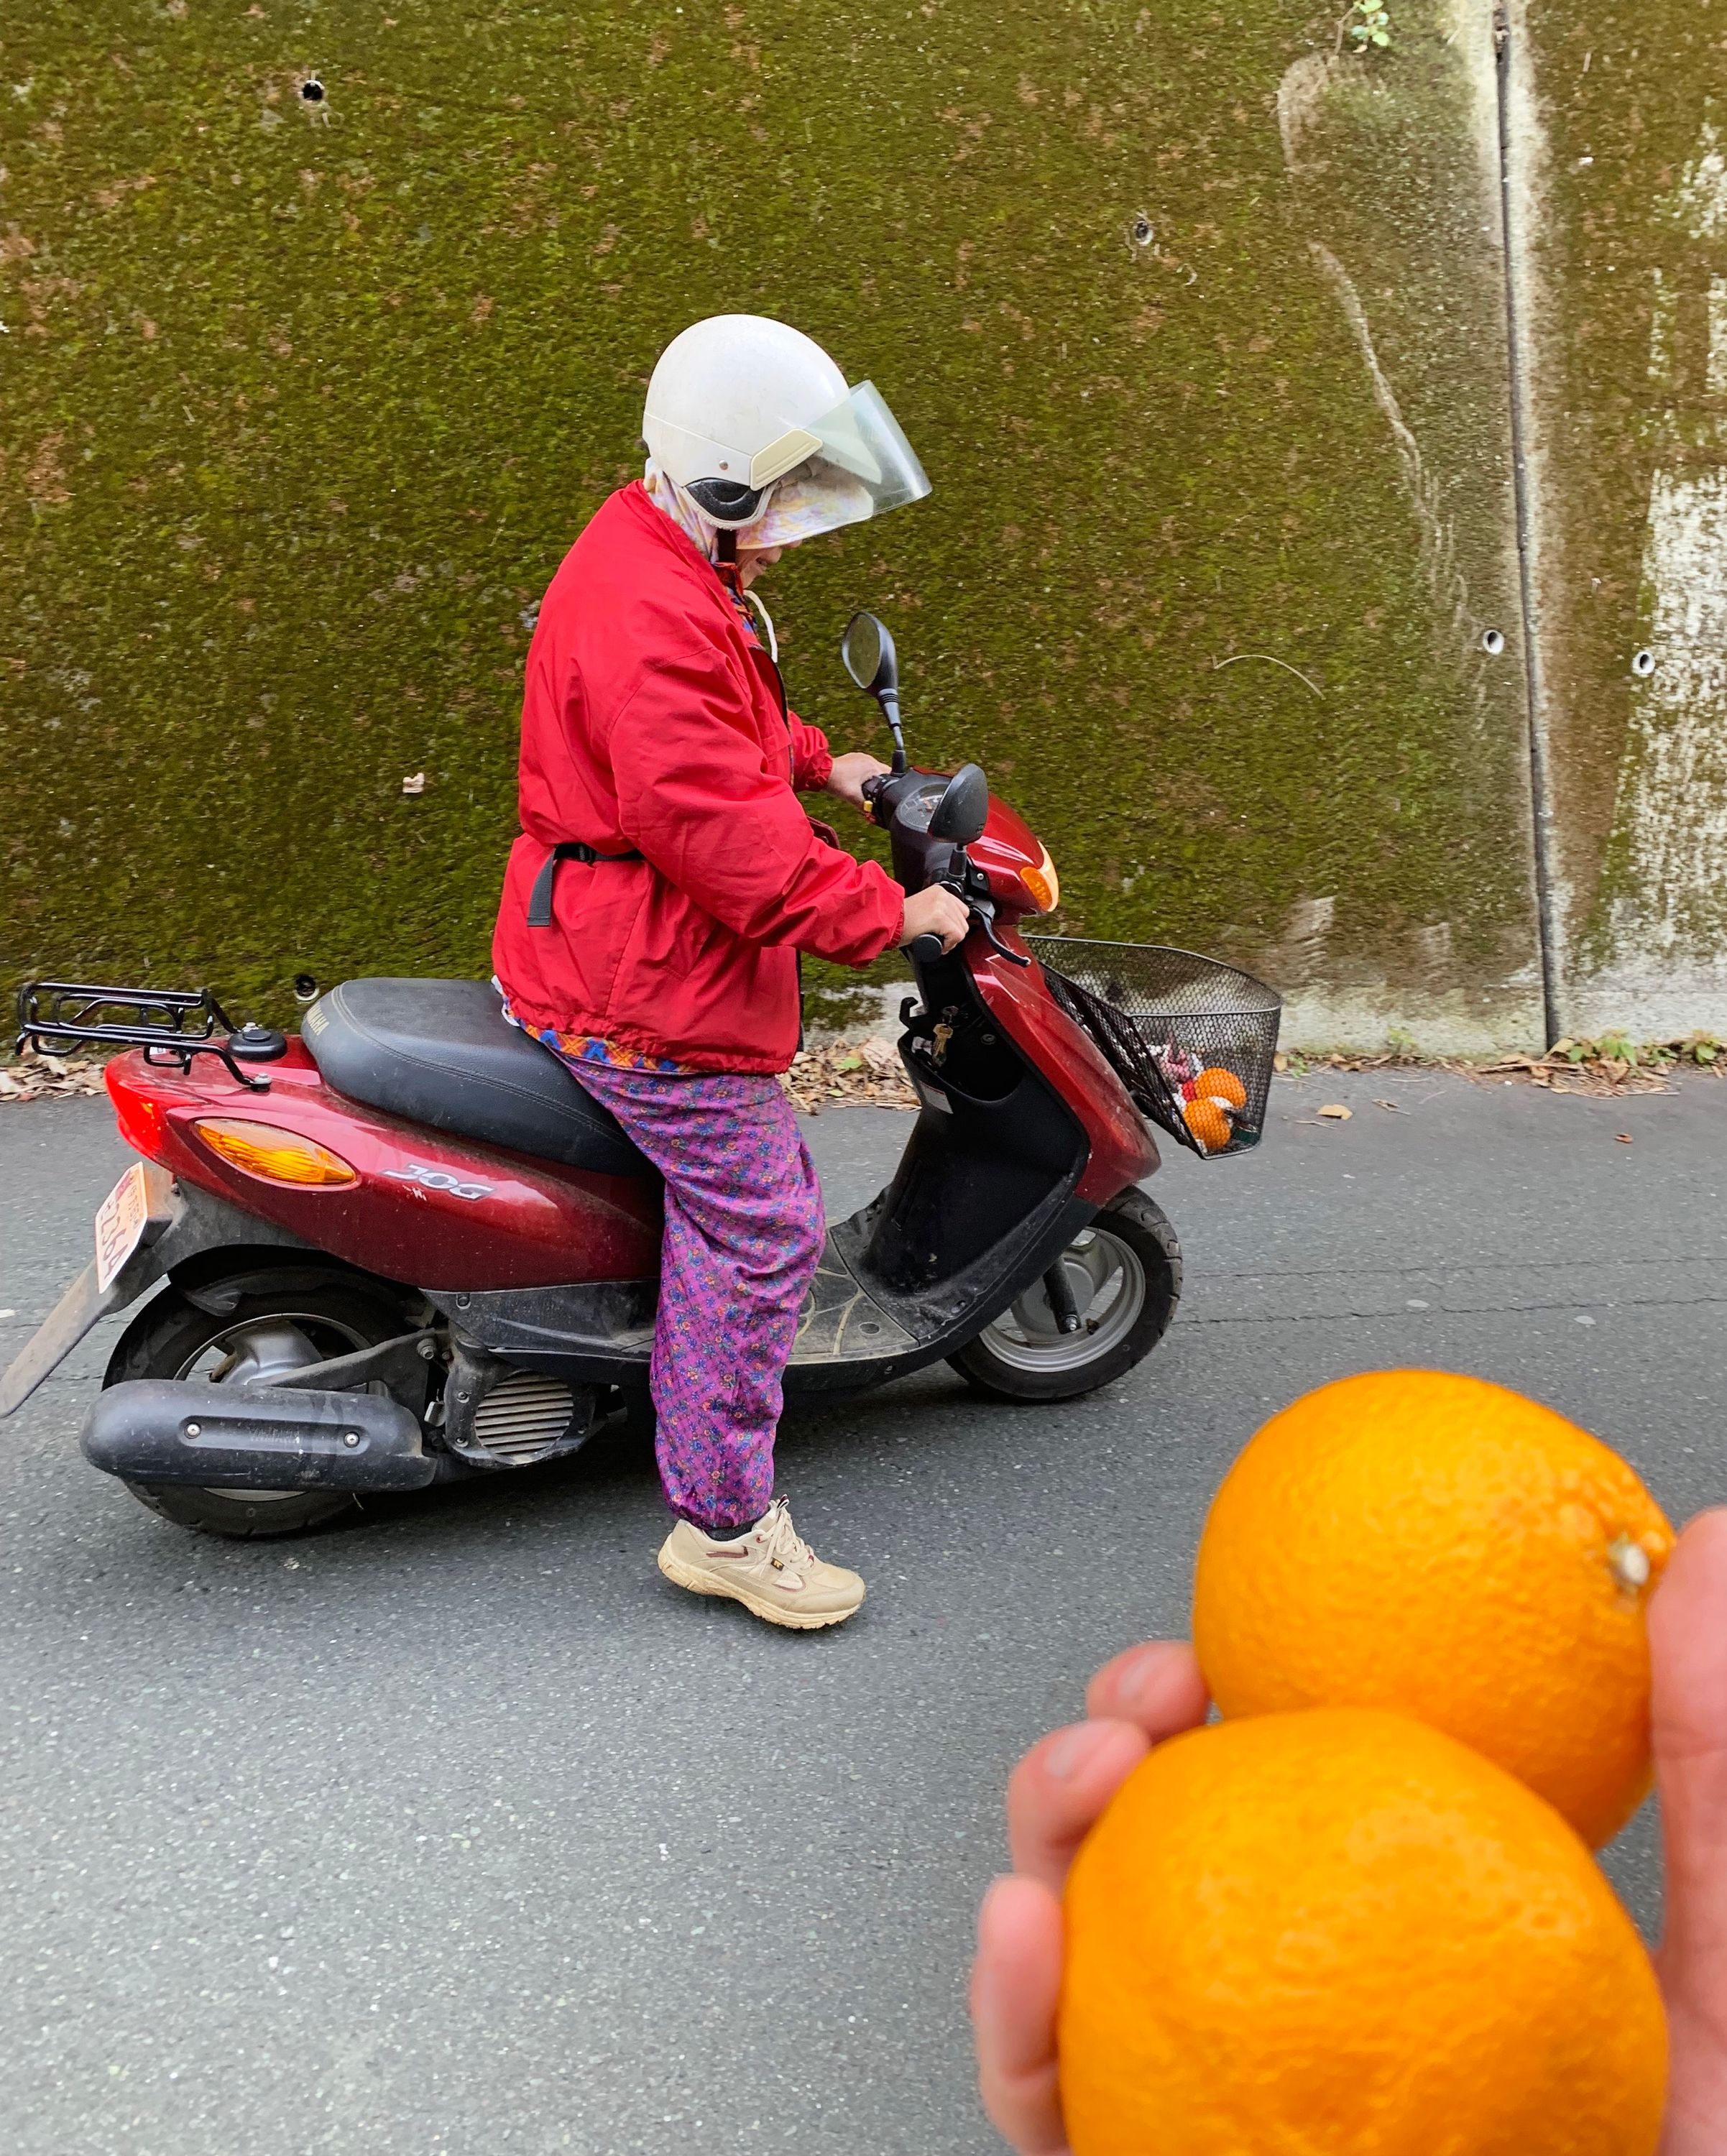 A woman in a red jacket and purple trousers astride a scooter, with oranges in her scooter’s basket. A hand reaches into the frame from the bottom right corner, holding two more oranges.